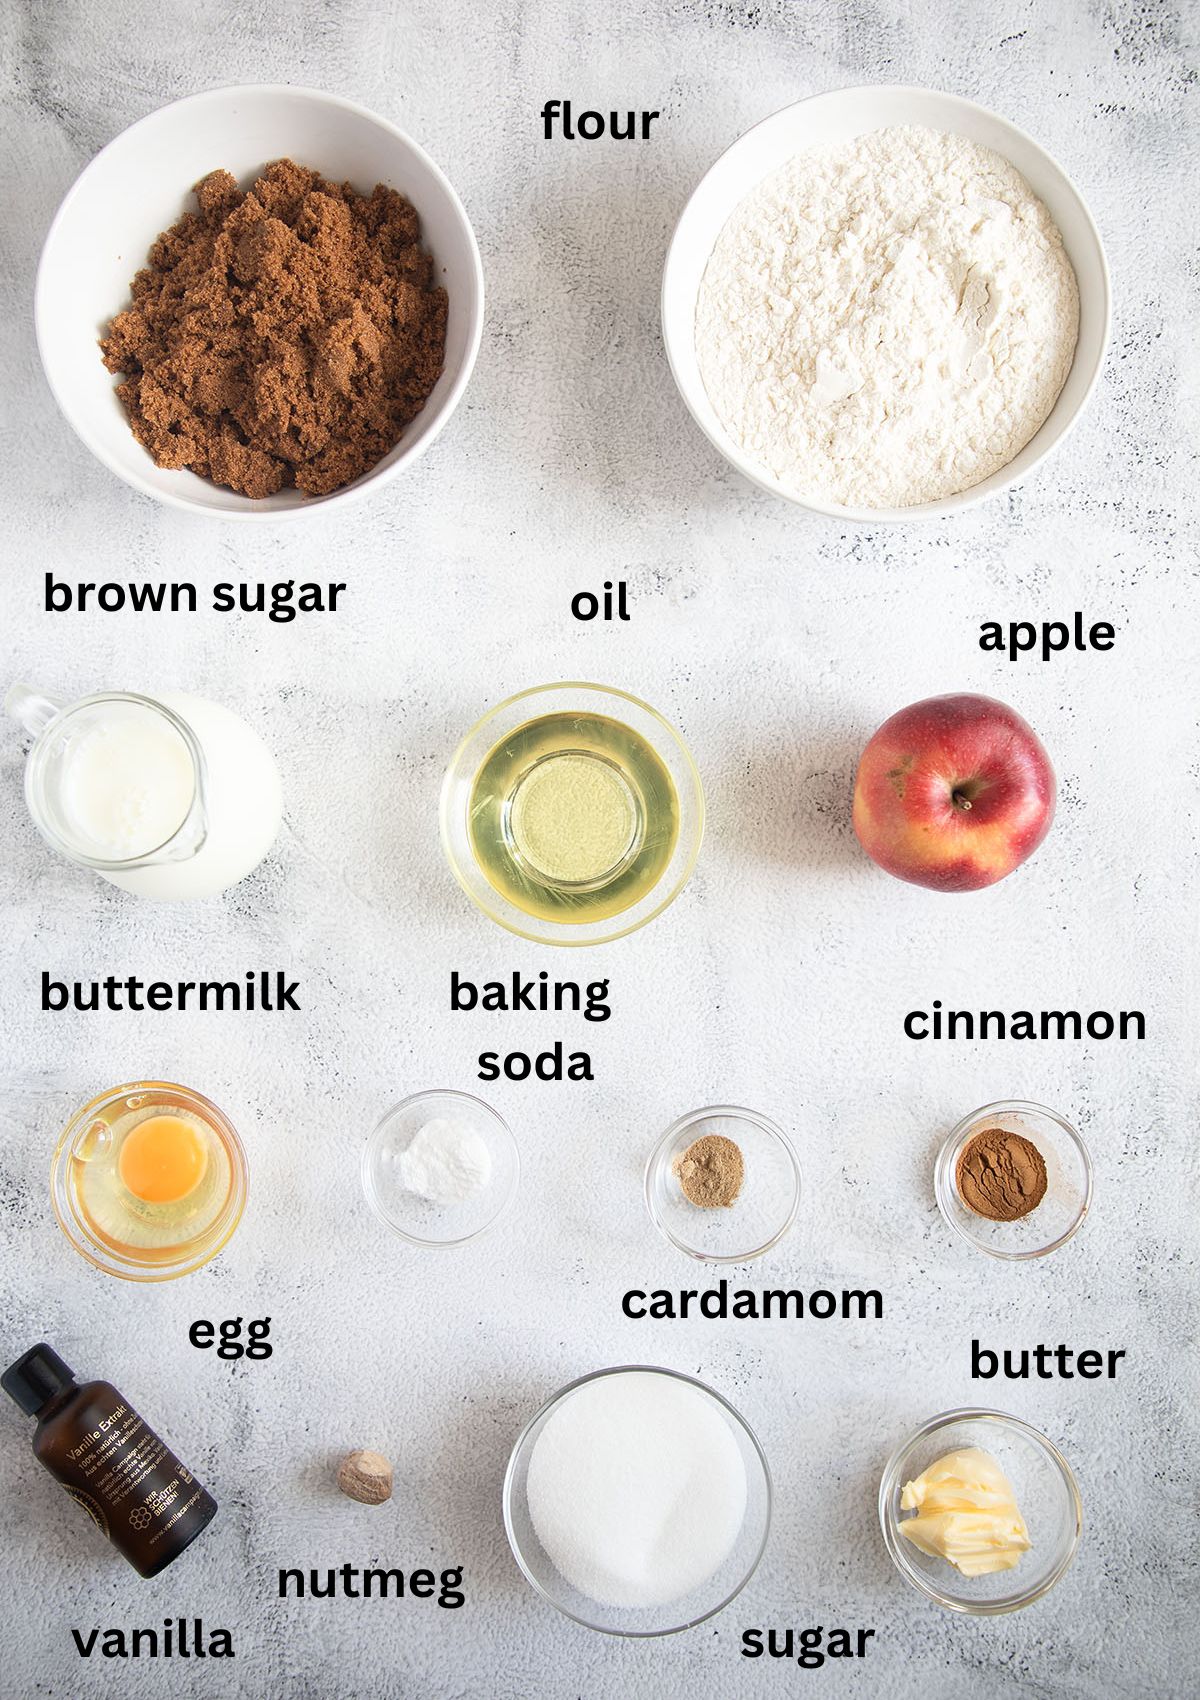 listed ingredients for making cake with brown sugar, cinnamon and apples on the table.